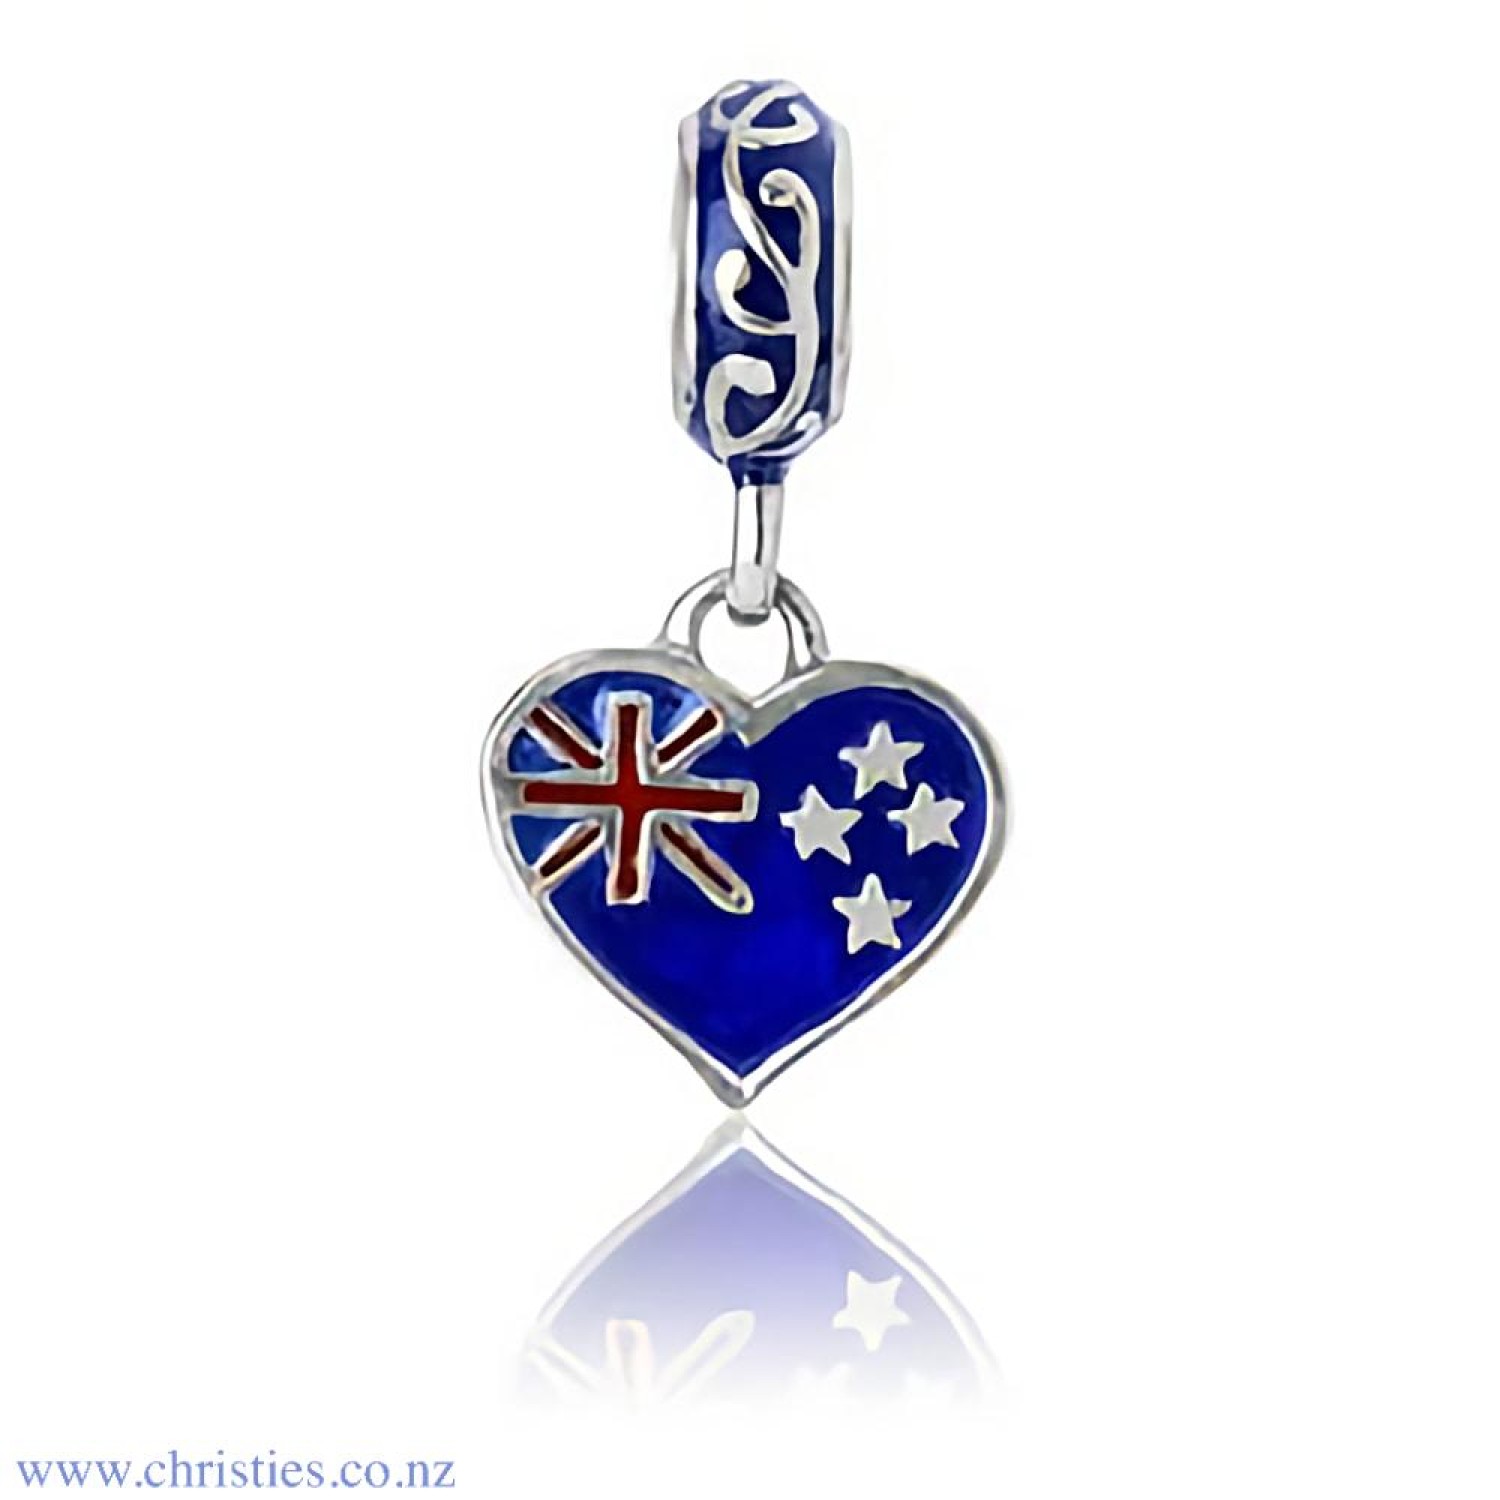 LKD048 Evolve Jewellery NZ Love Charm. Thel NZ Love charm is a celebration of the love and pride we hold for Aotearoa. The Union Jack symbolises the connection with our British ancestry and the stars depict the iconic Southern Cross. Embossed cultural des